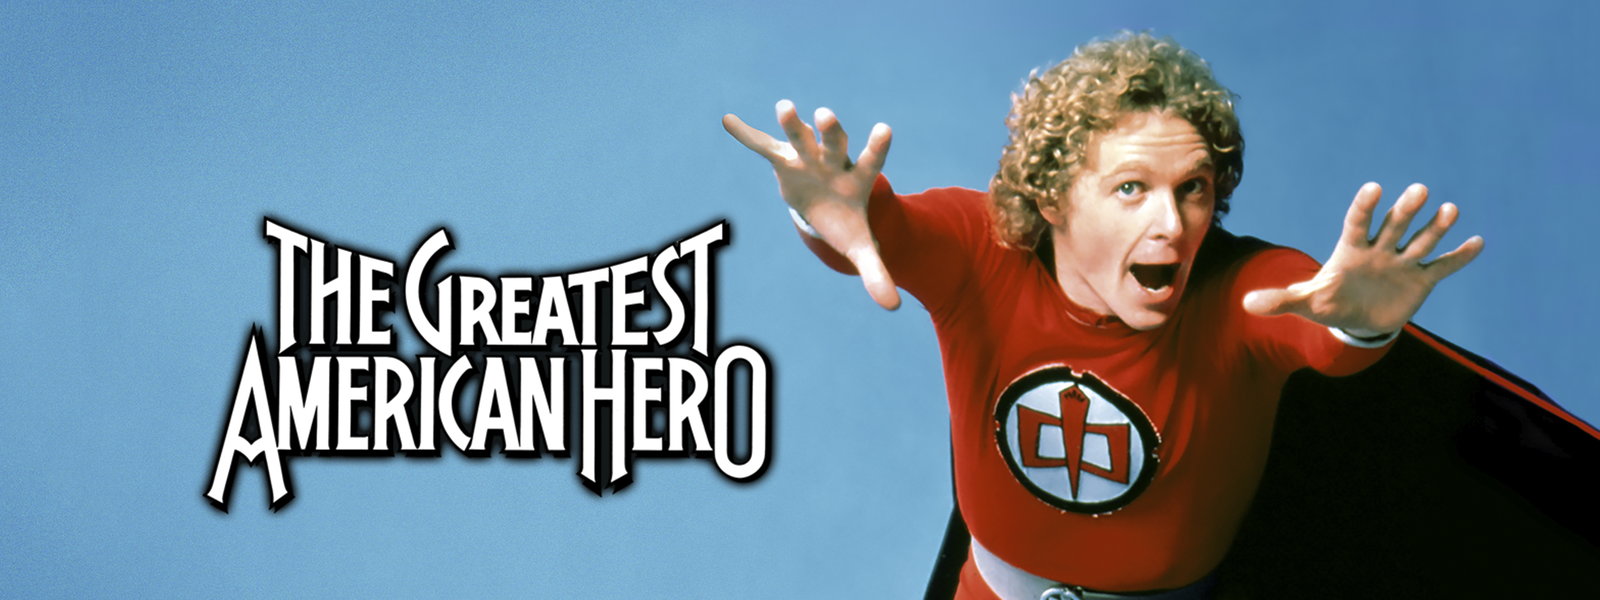 LEGO MOVIE Directors Remaking THE GREATEST AMERICAN HERO For TV